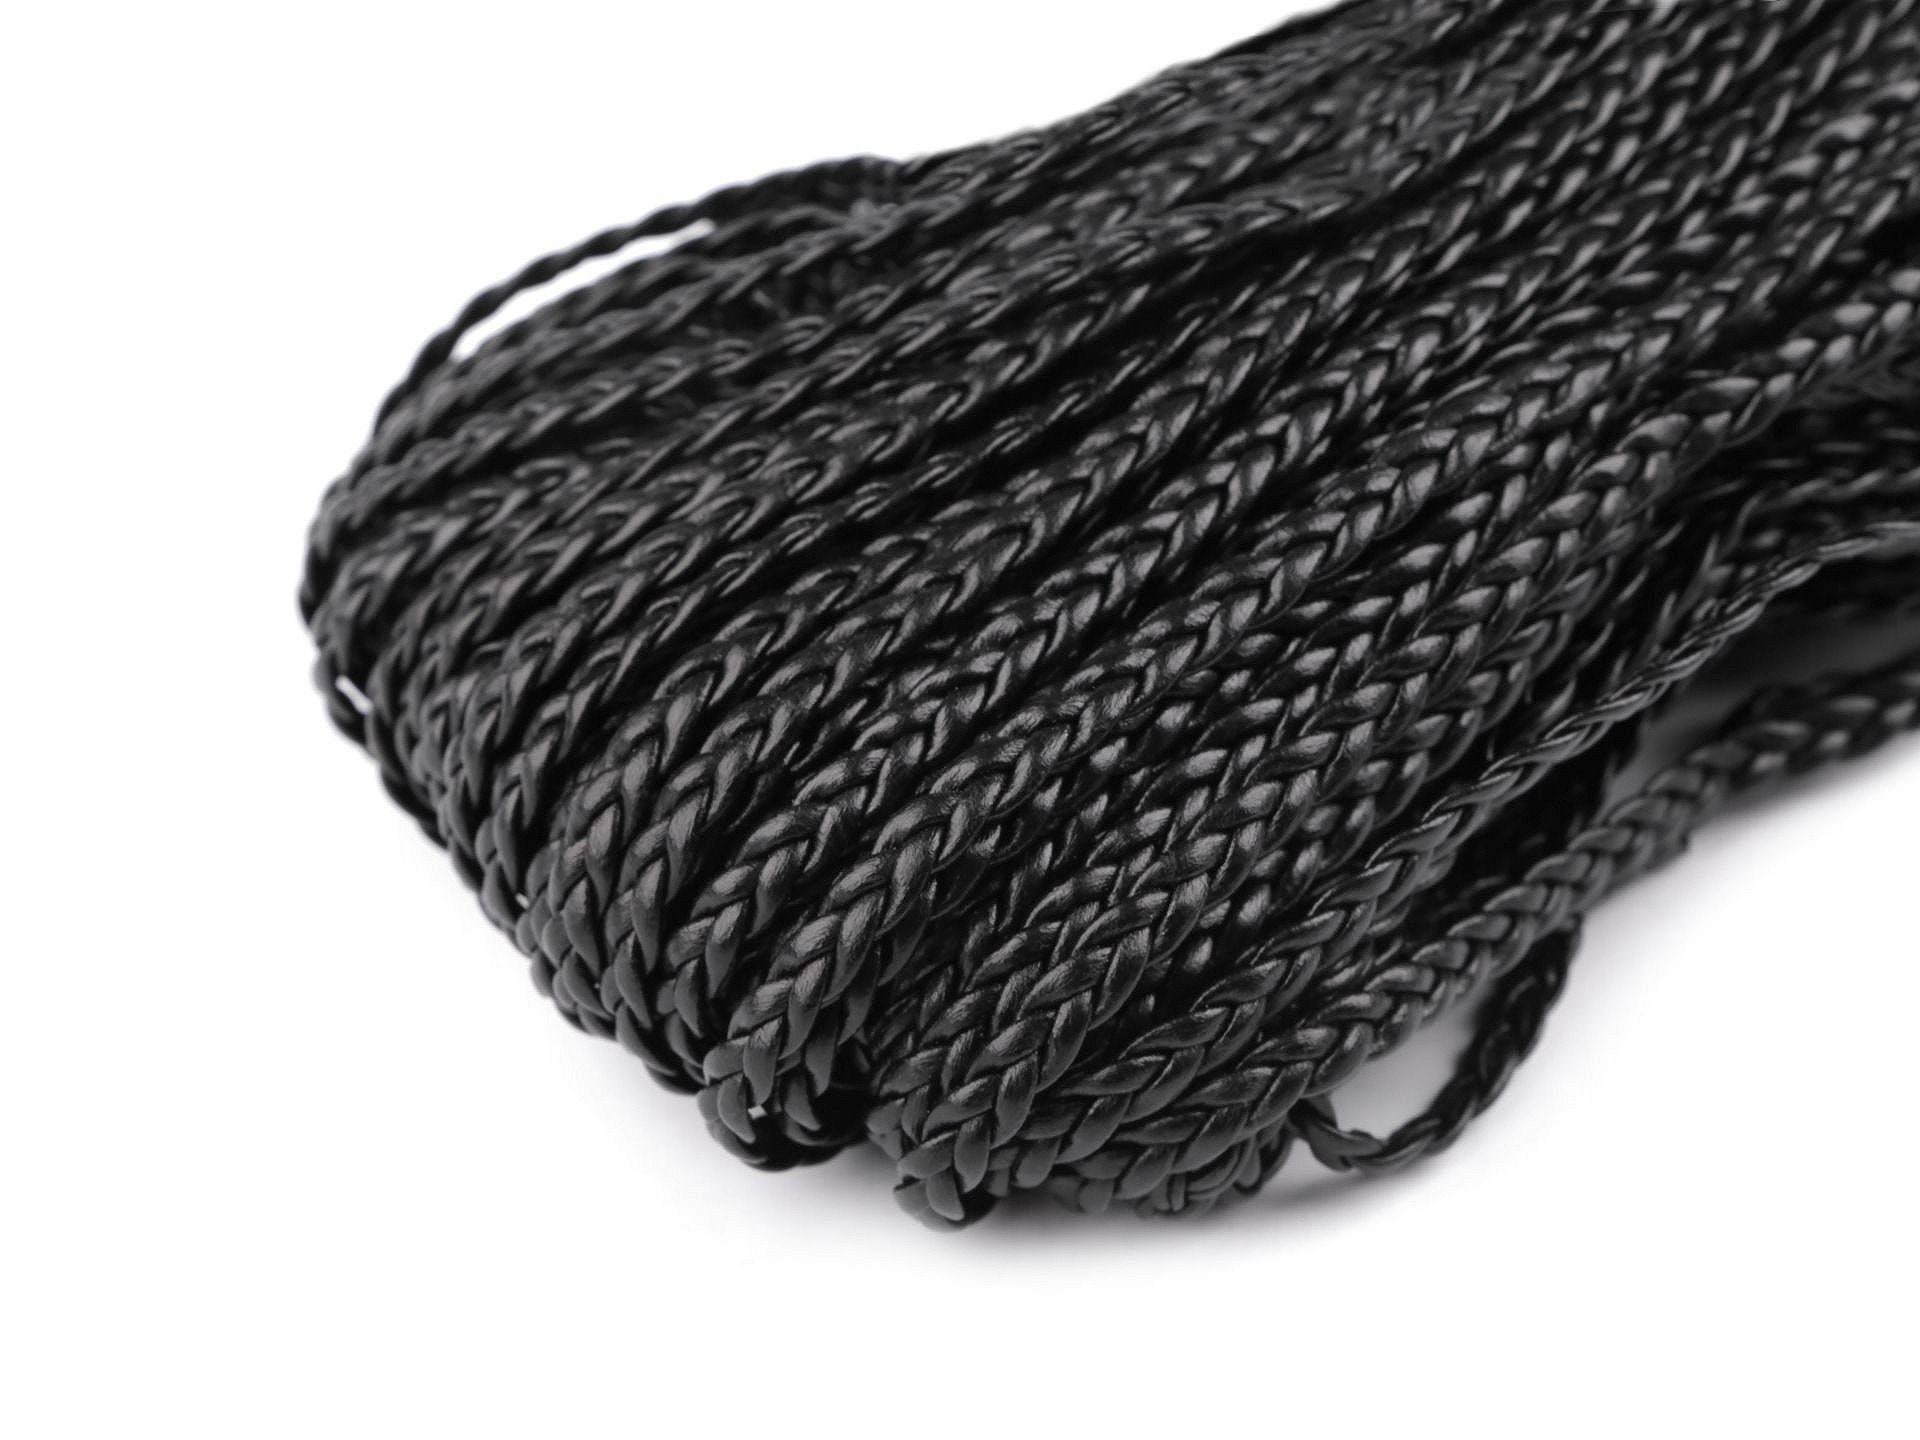 Leather String, Flat Suede Cord Faux Leather Cord Thin Leather Lace for  Bracelets, Necklaces, Jewelry Making and Art Crafts (2.7MM Black)